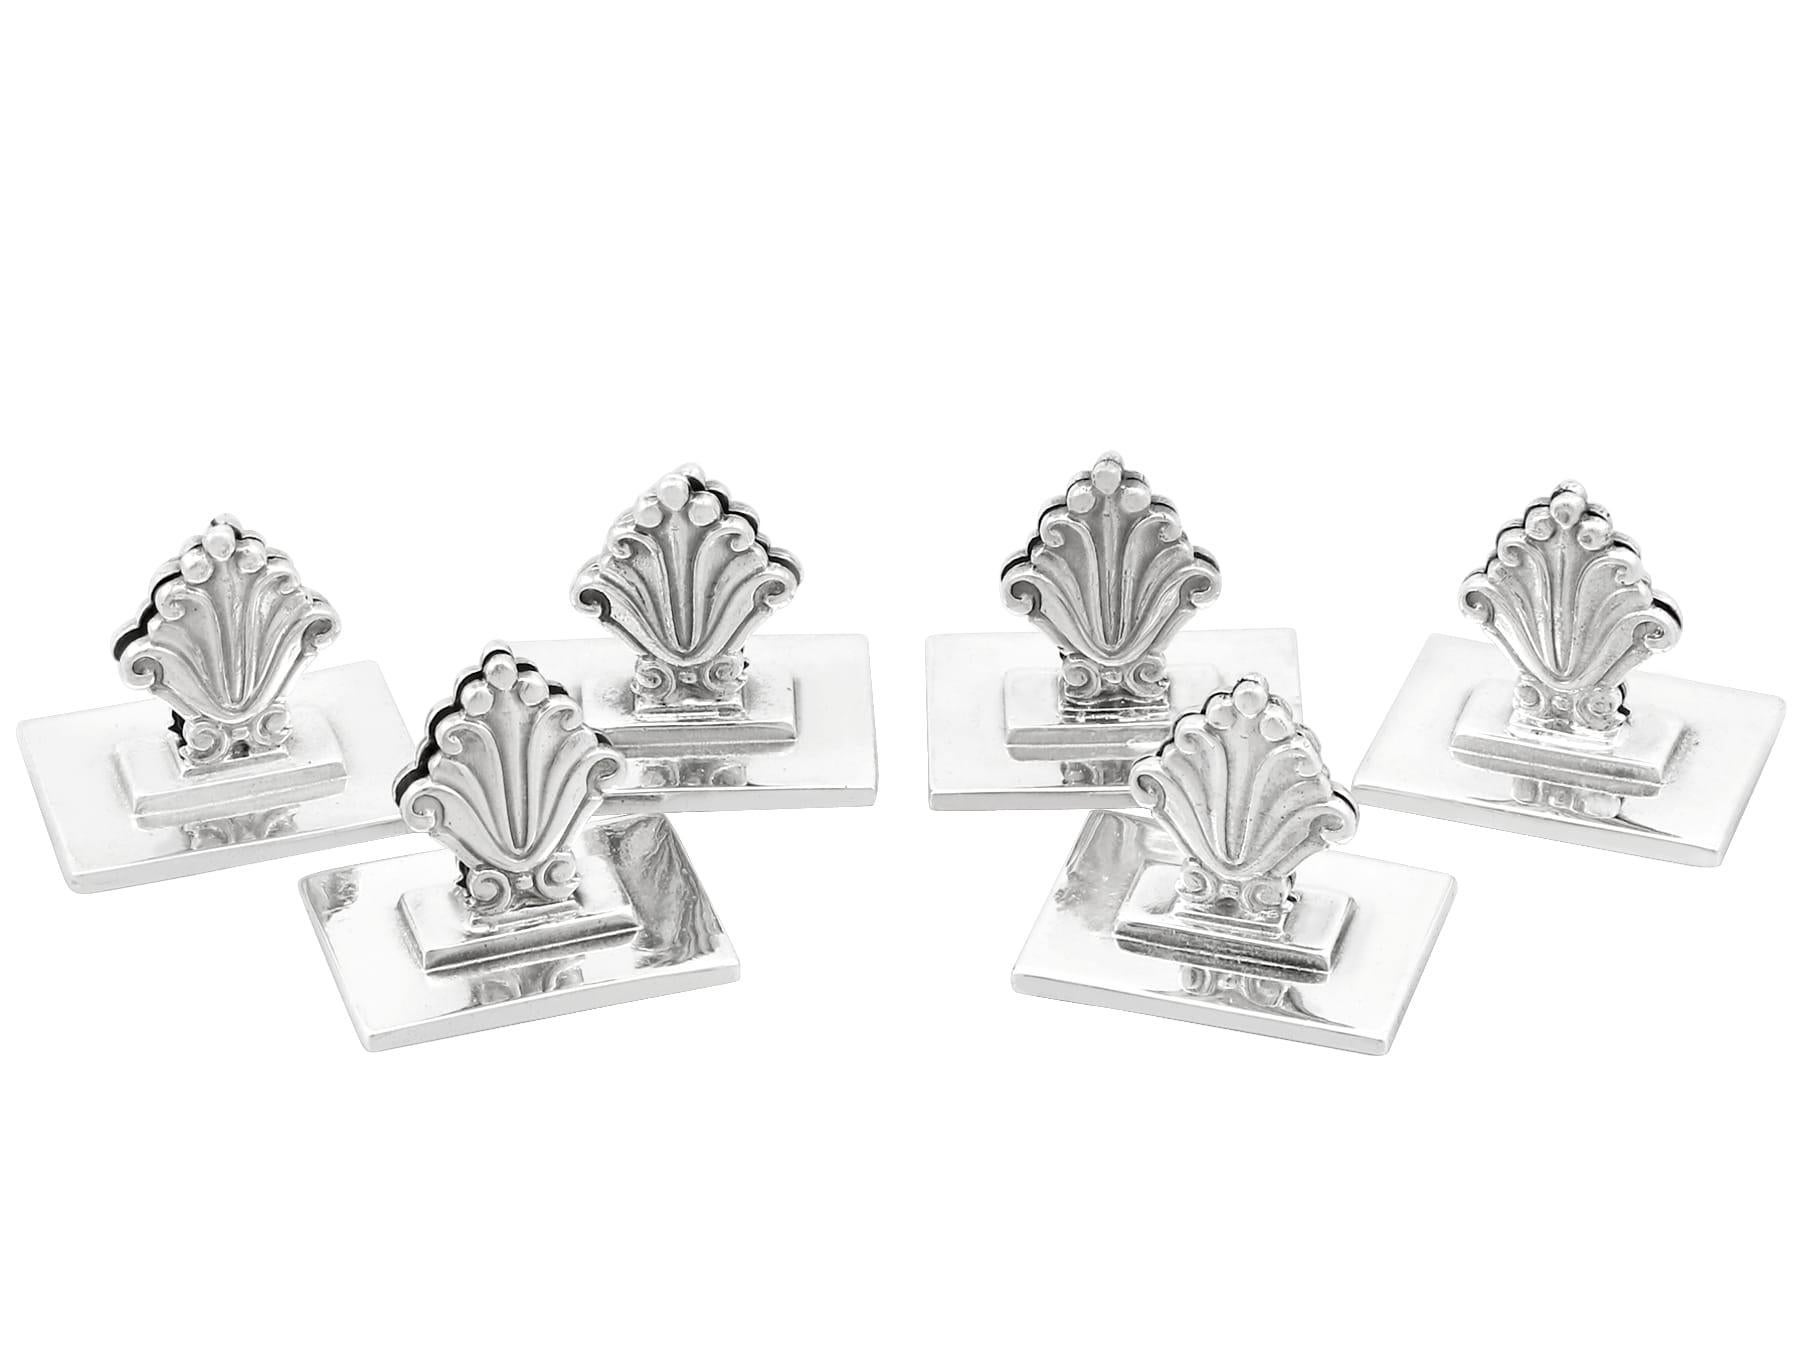 An exceptional, fine and impressive set of six antique Danish cast sterling silver menu / card holders made by Georg Jensen; an addition to our diverse dining silverware collection.

These exceptional antique Danish cast sterling silver menu card